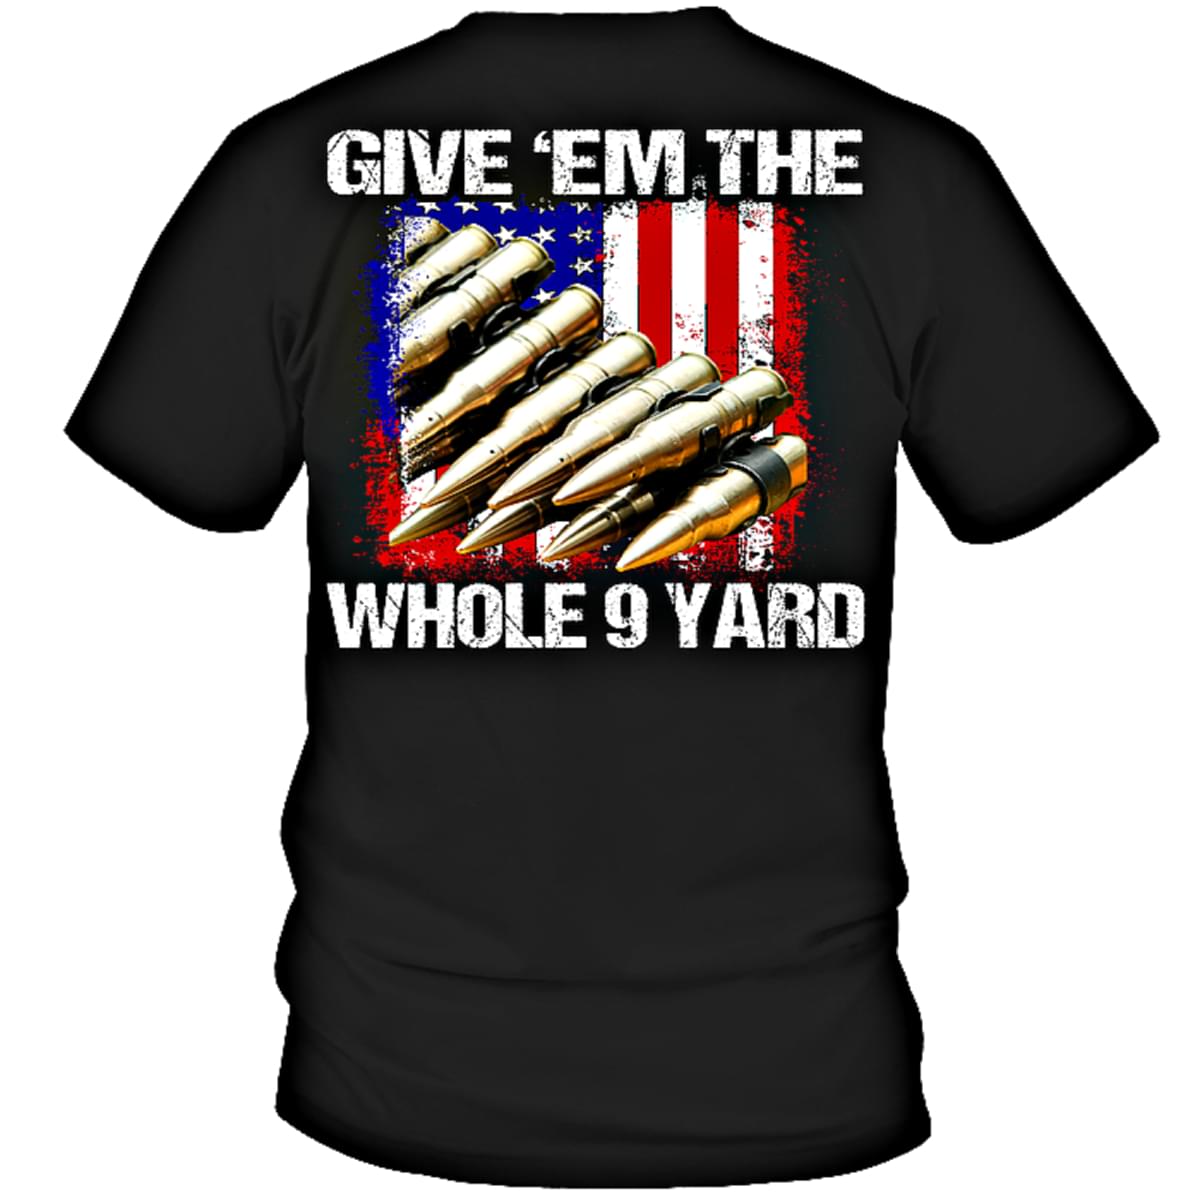 Give 'em the whole 9 yard - Bullets on america flag